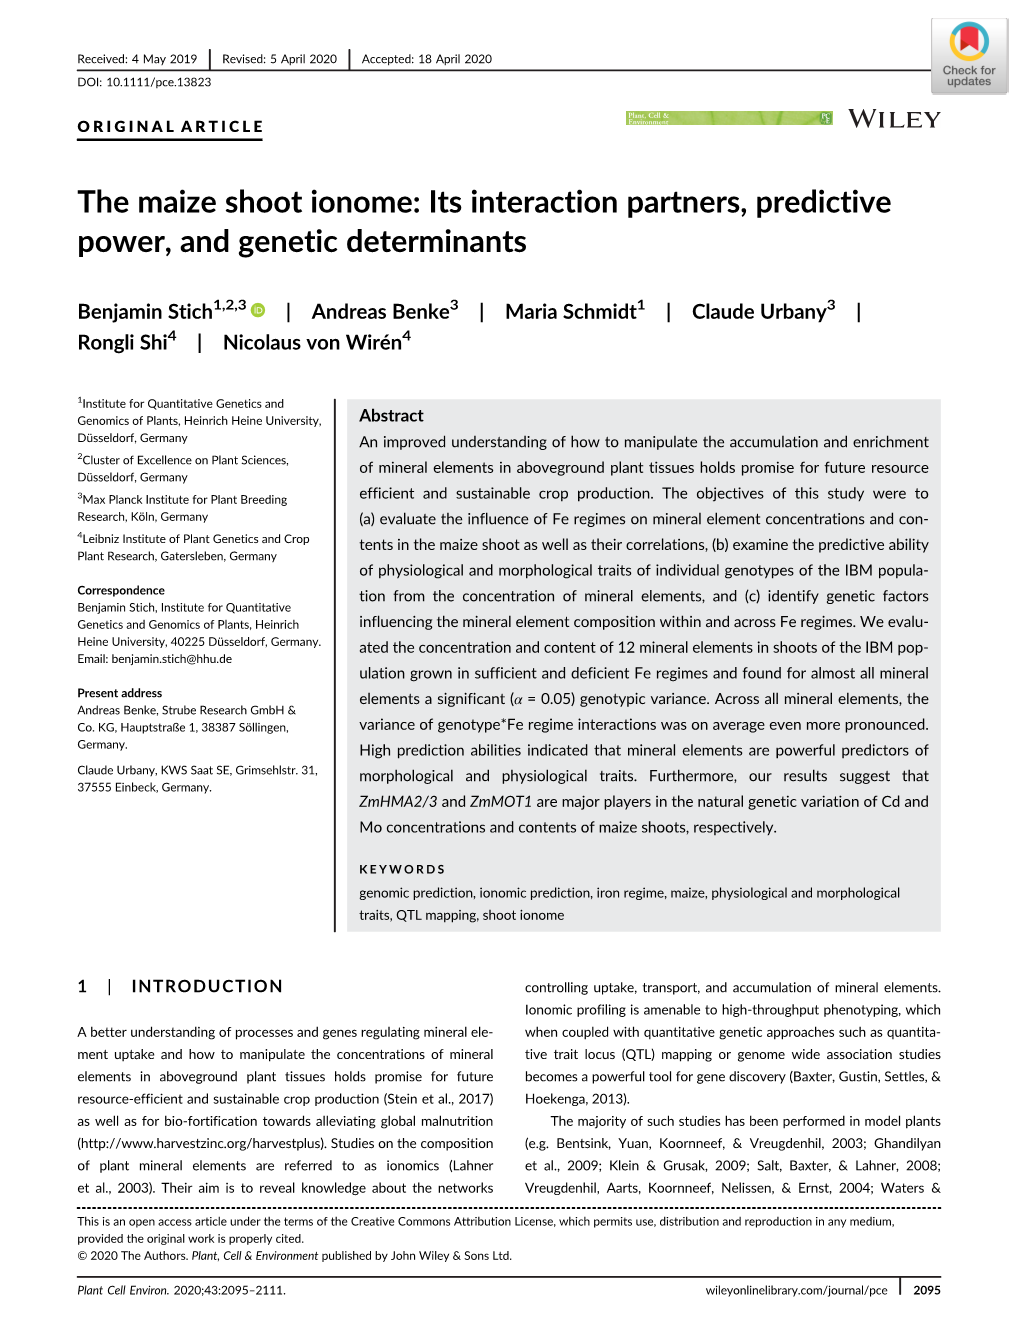 The Maize Shoot Ionome: Its Interaction Partners, Predictive Power, and Genetic Determinants